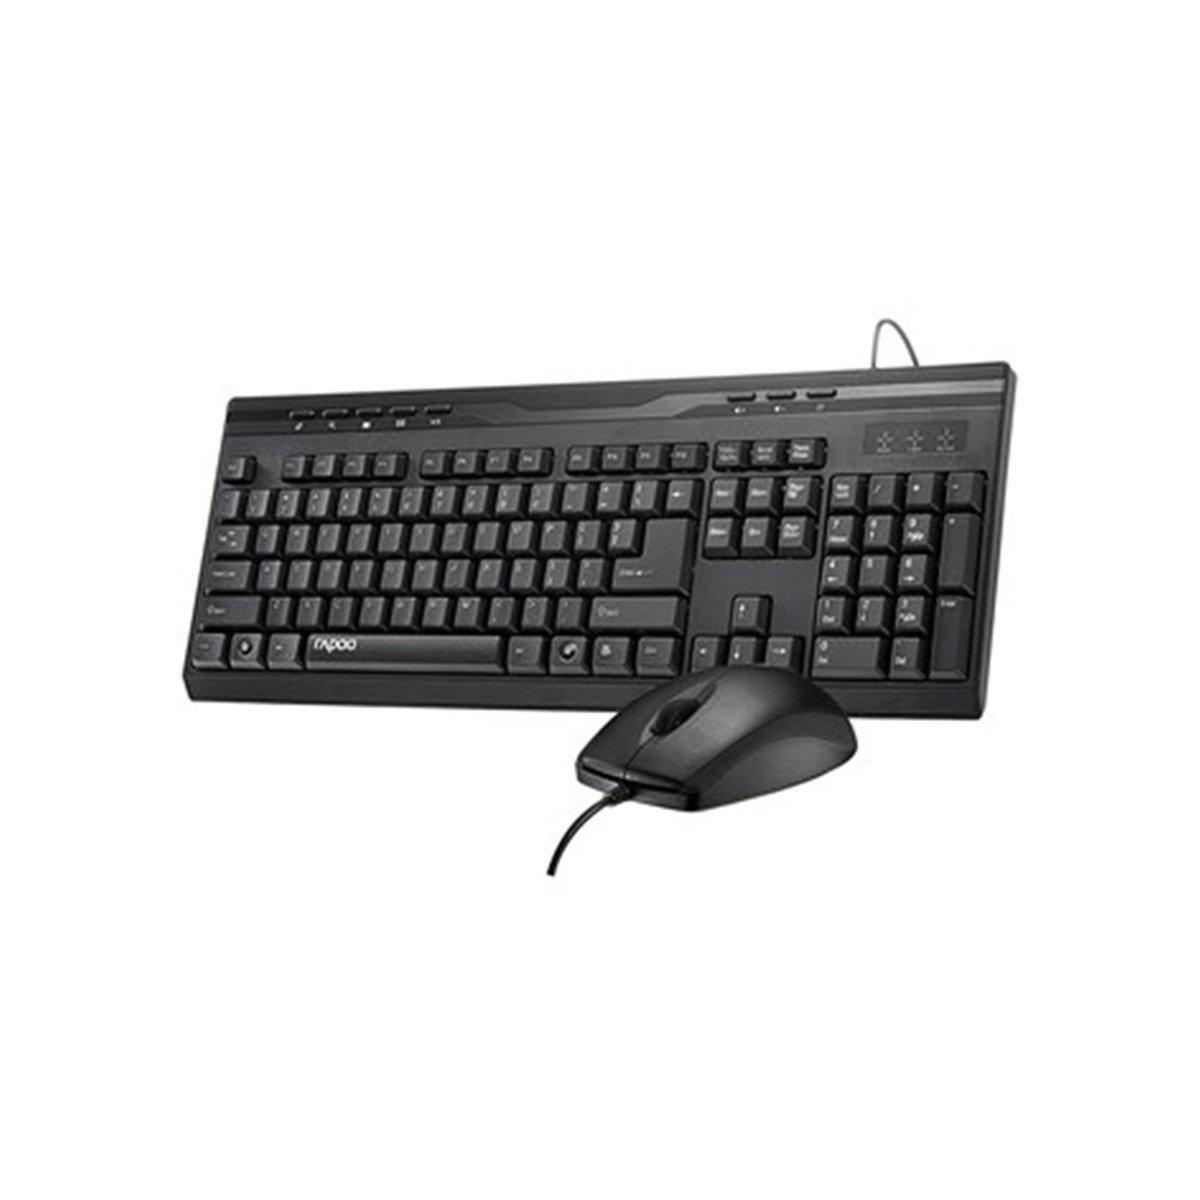 Rapoo Wired Keyboard + Mouse NX1710